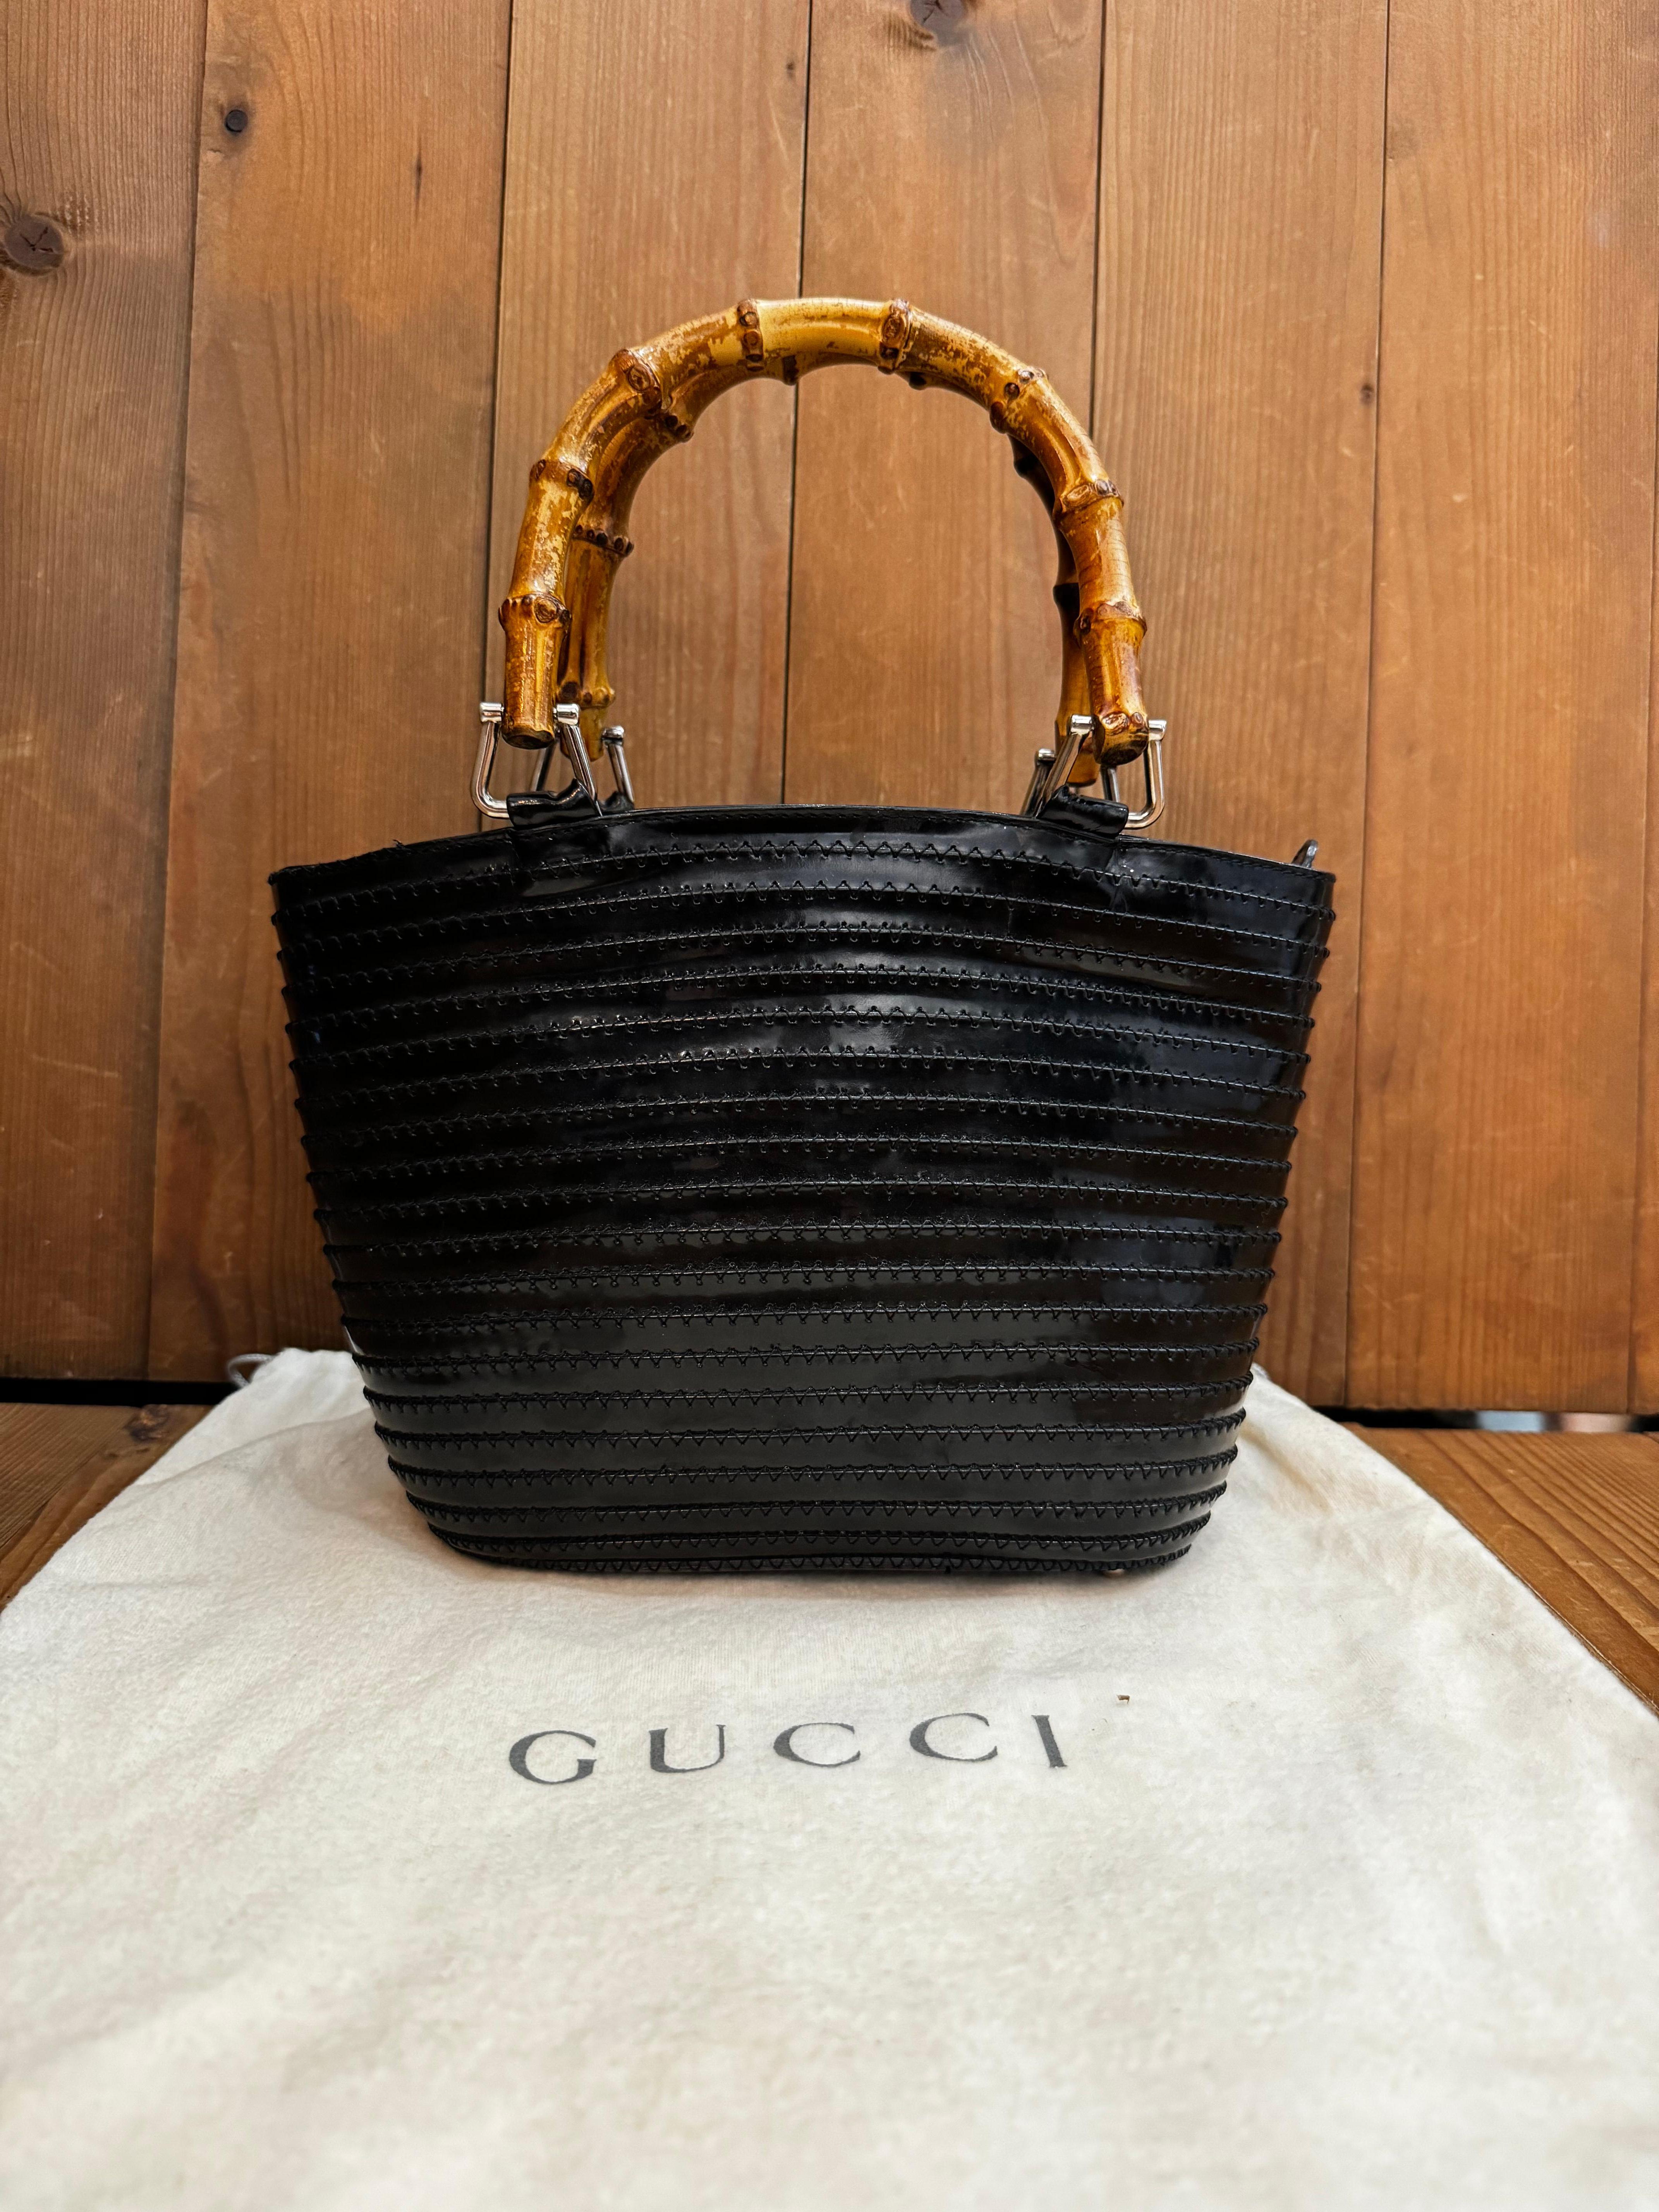 This vintage GUCCI mini tote bag is crafted of black smooth leather in folds featuring silver toned hardware and bamboo handles. Top zipper closure opens to a black leather interior featuring a zippered pocket. Made in Italy. Measures approximately